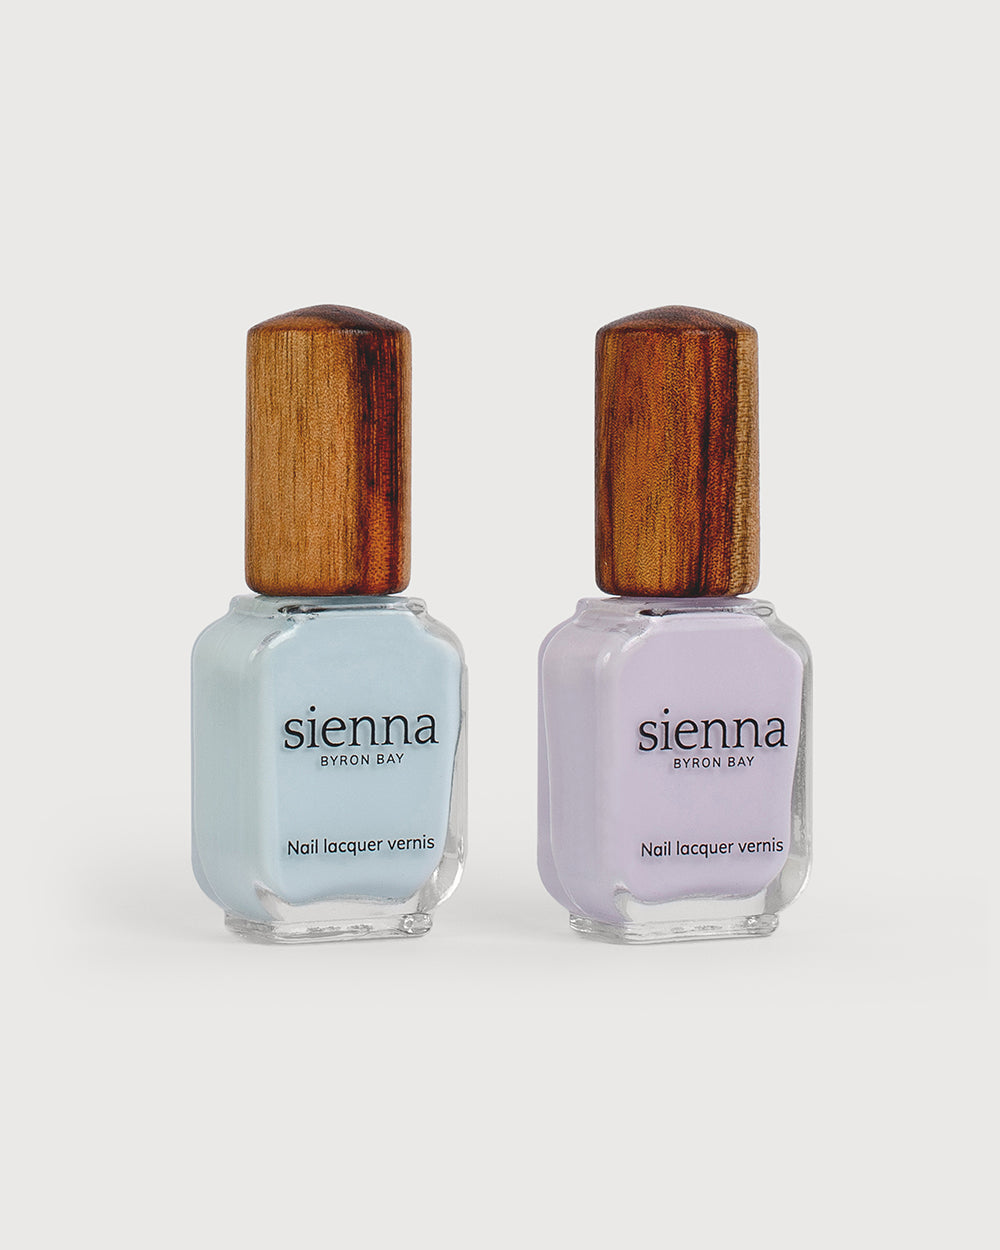 pastel blue and light lilac pastel nail polish bottles with timber cap